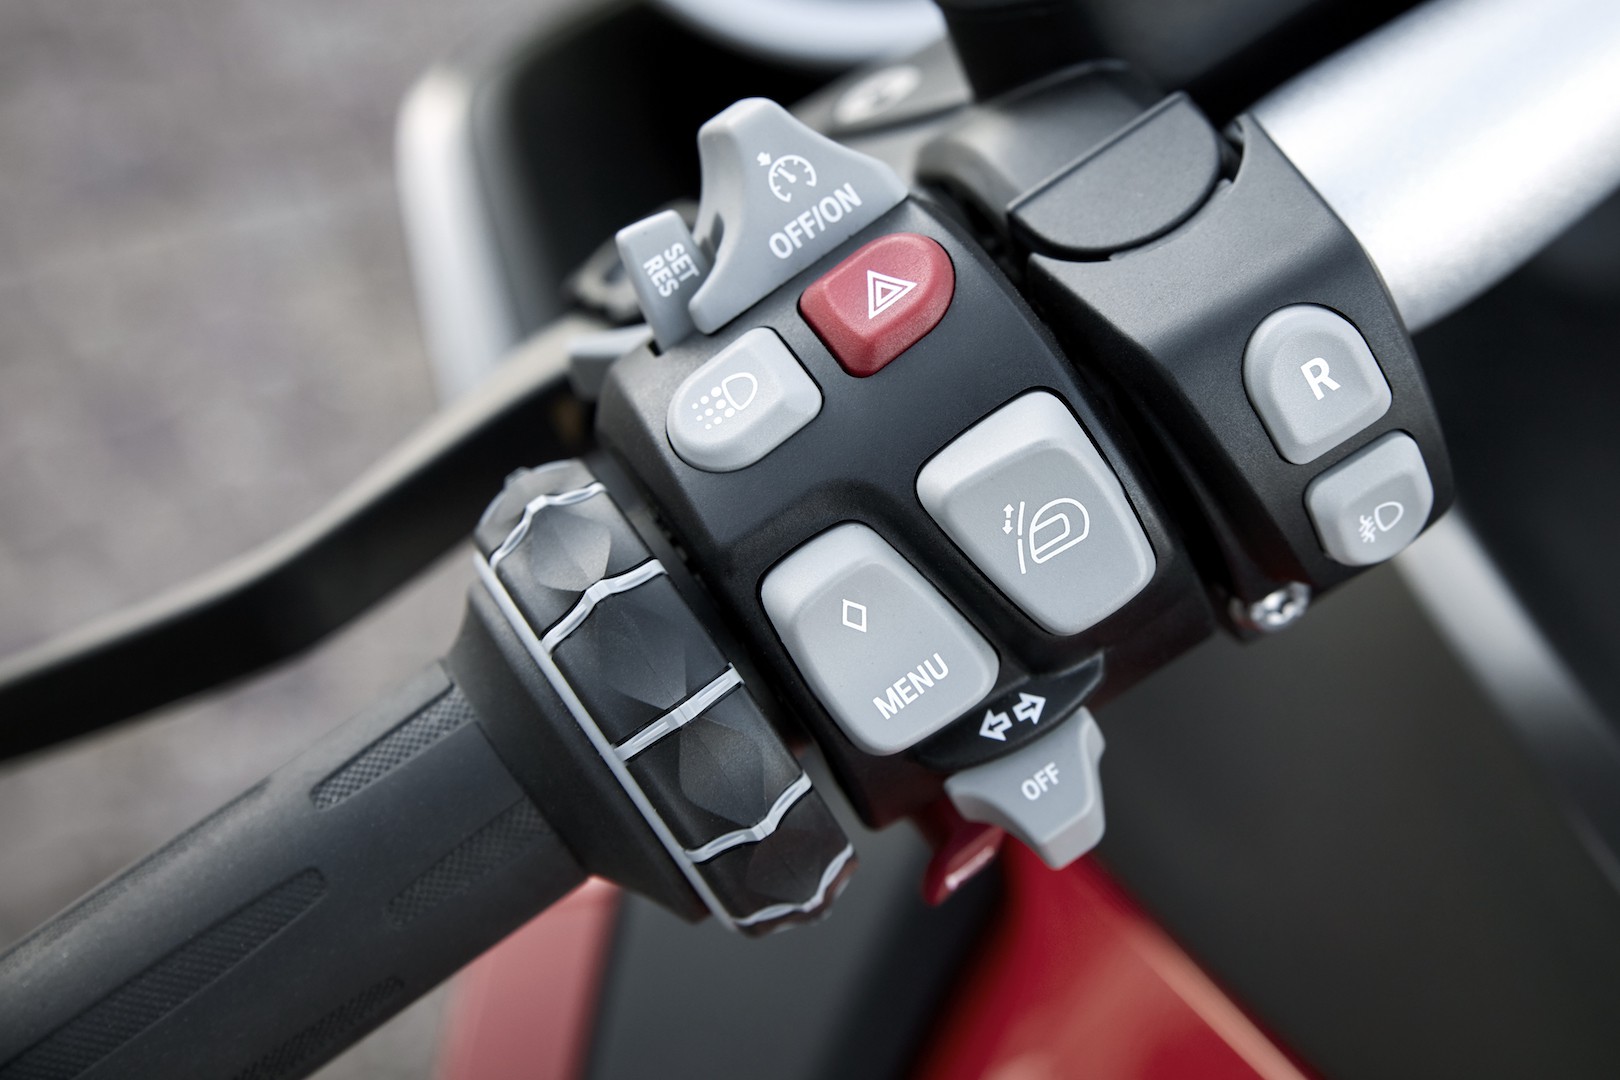 2017 BMW K1600GT gets Reverse Assist & SOS Button | DriveMag Riders